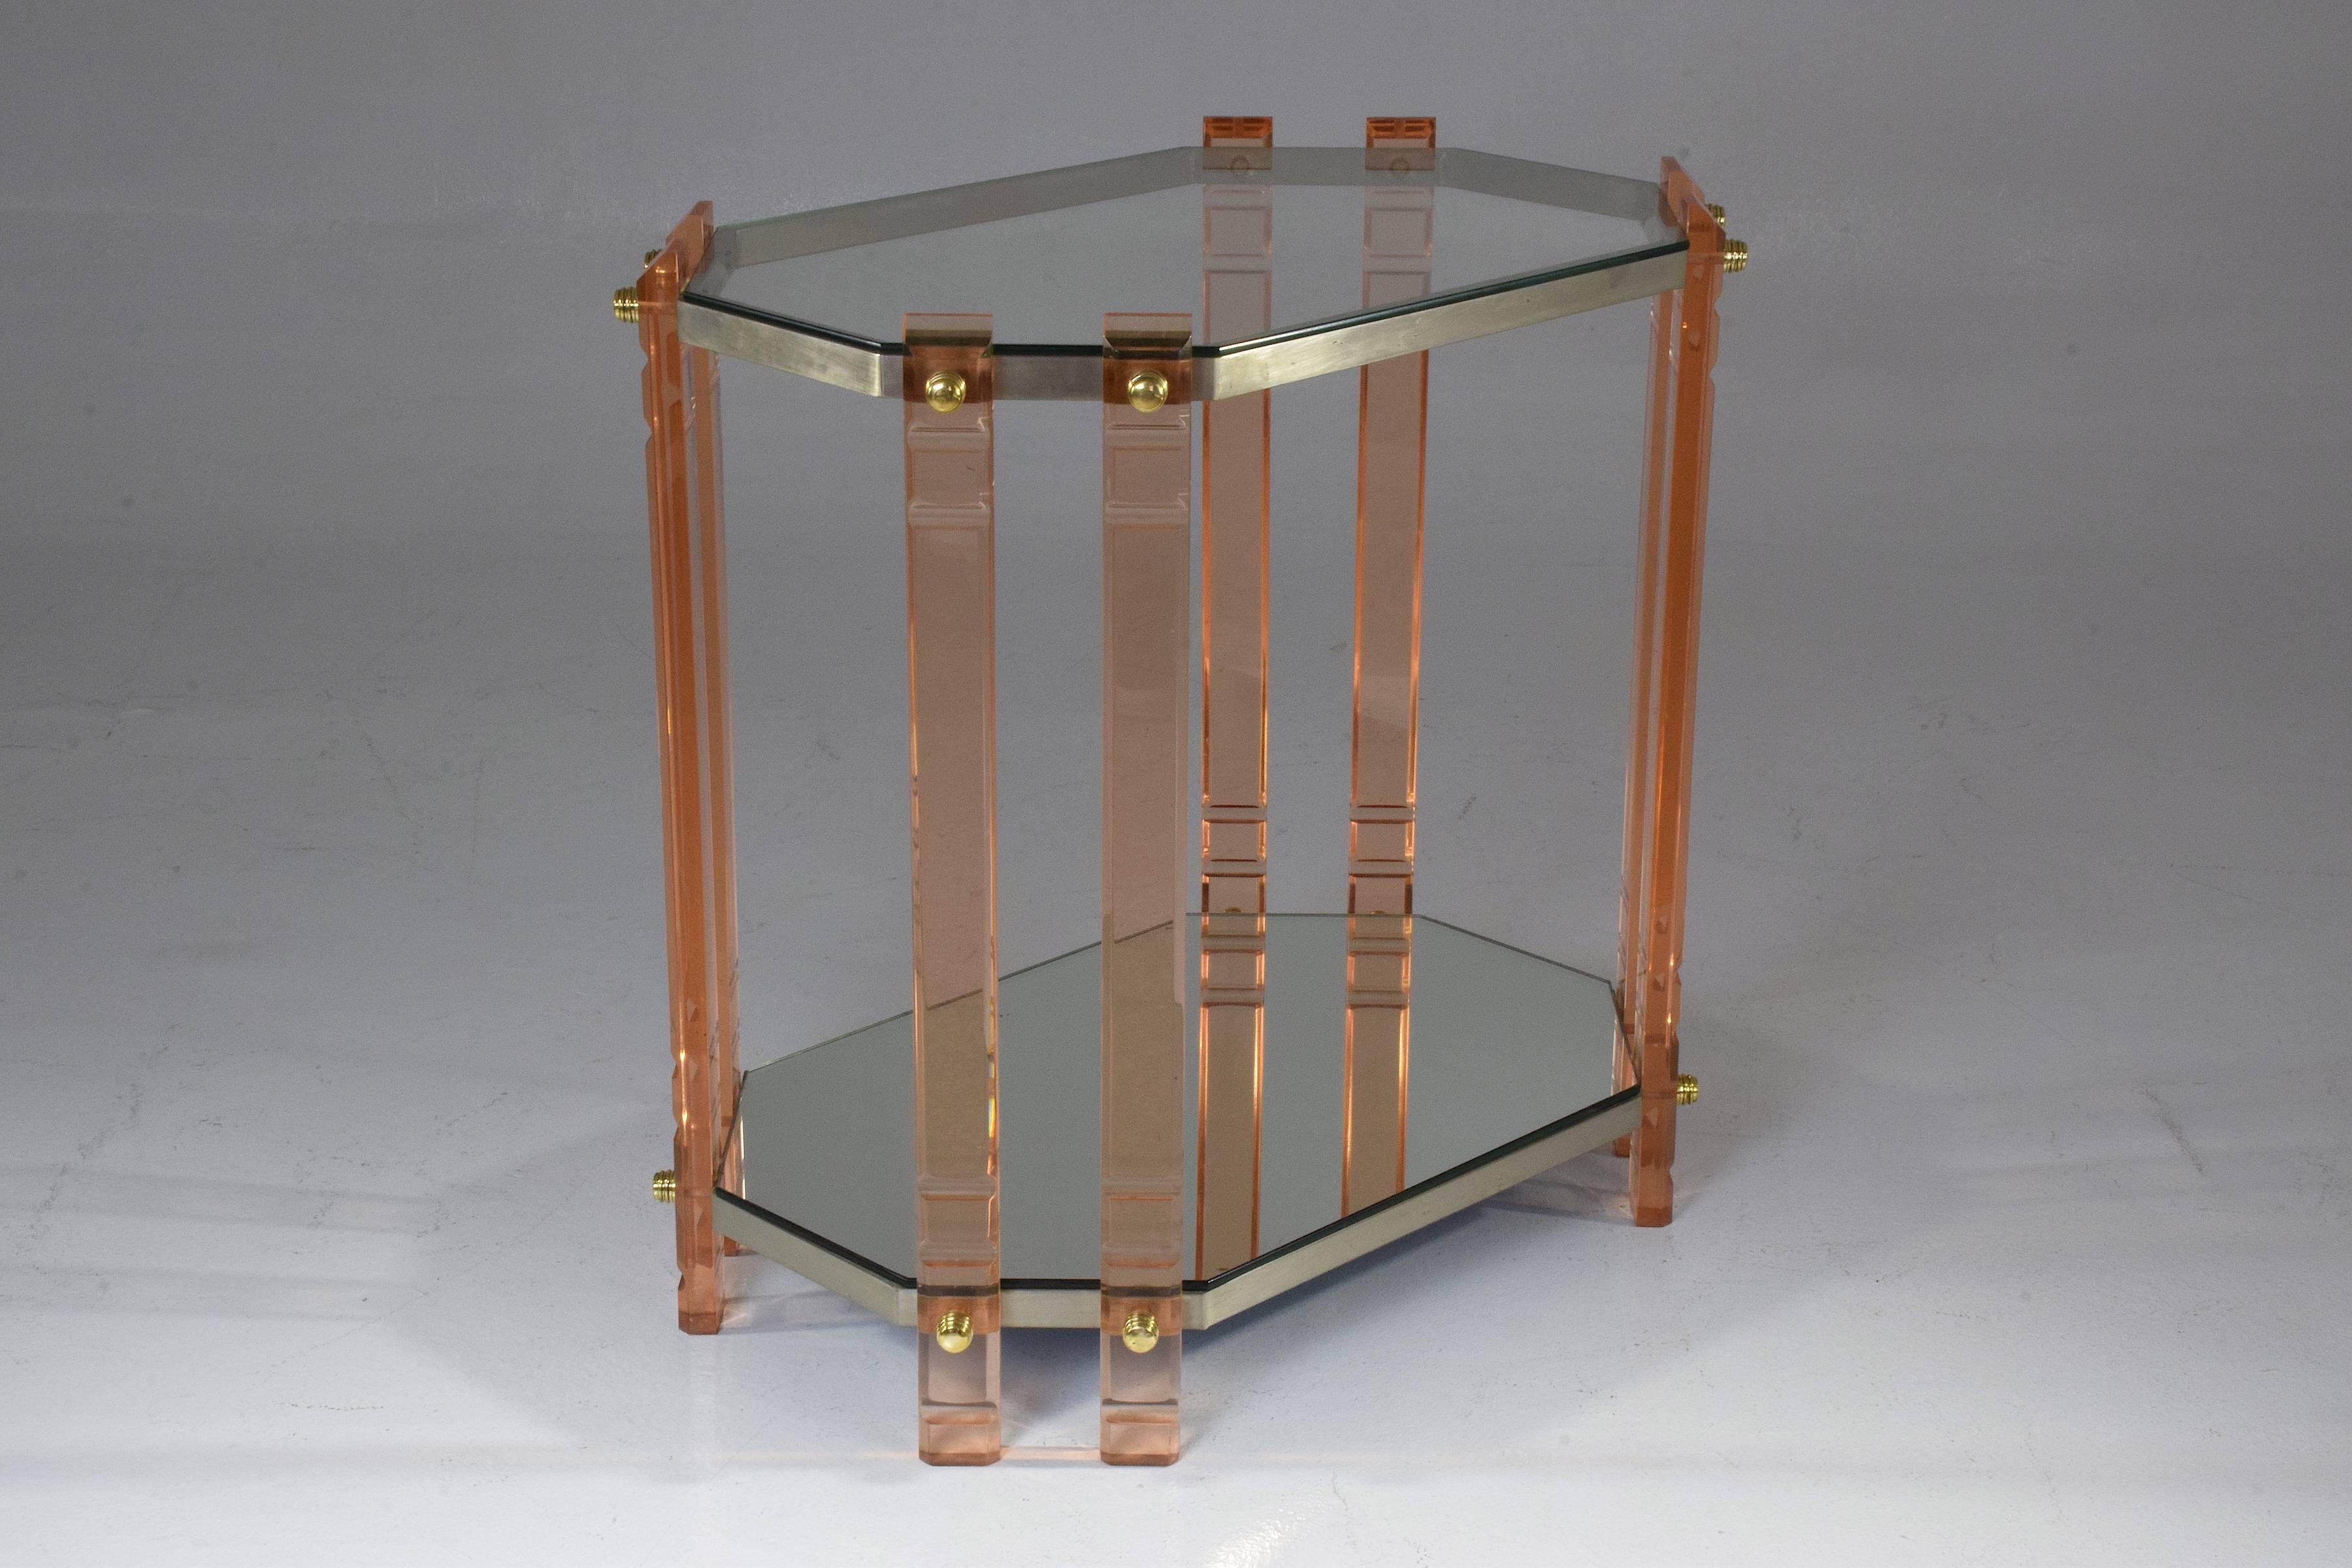 A 20 century French vintage storage piece, accent table, étagère or bar cart composed of a light pink plexiglass structure with polished brass screws, stainless steel shelves with mirrored glass table tops. This piece will highlight any living area